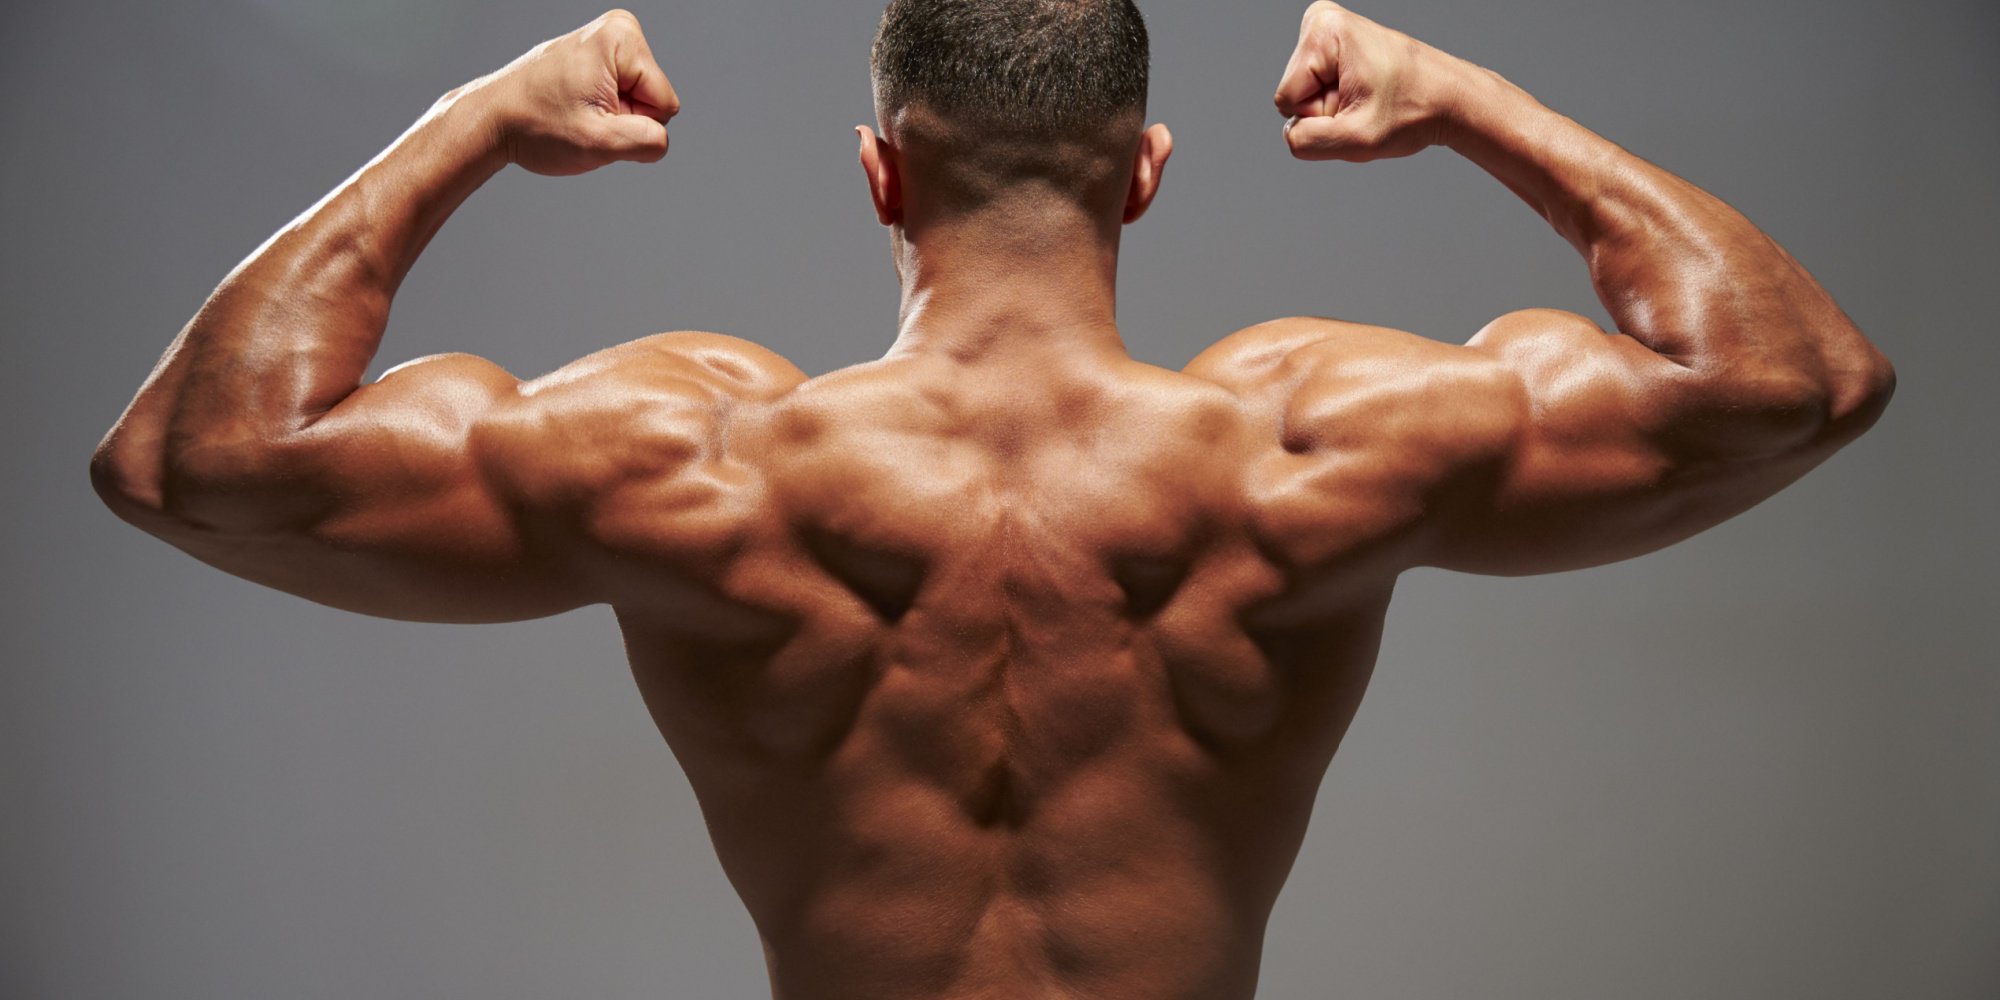 The Best Exercises to Build a Muscular Back